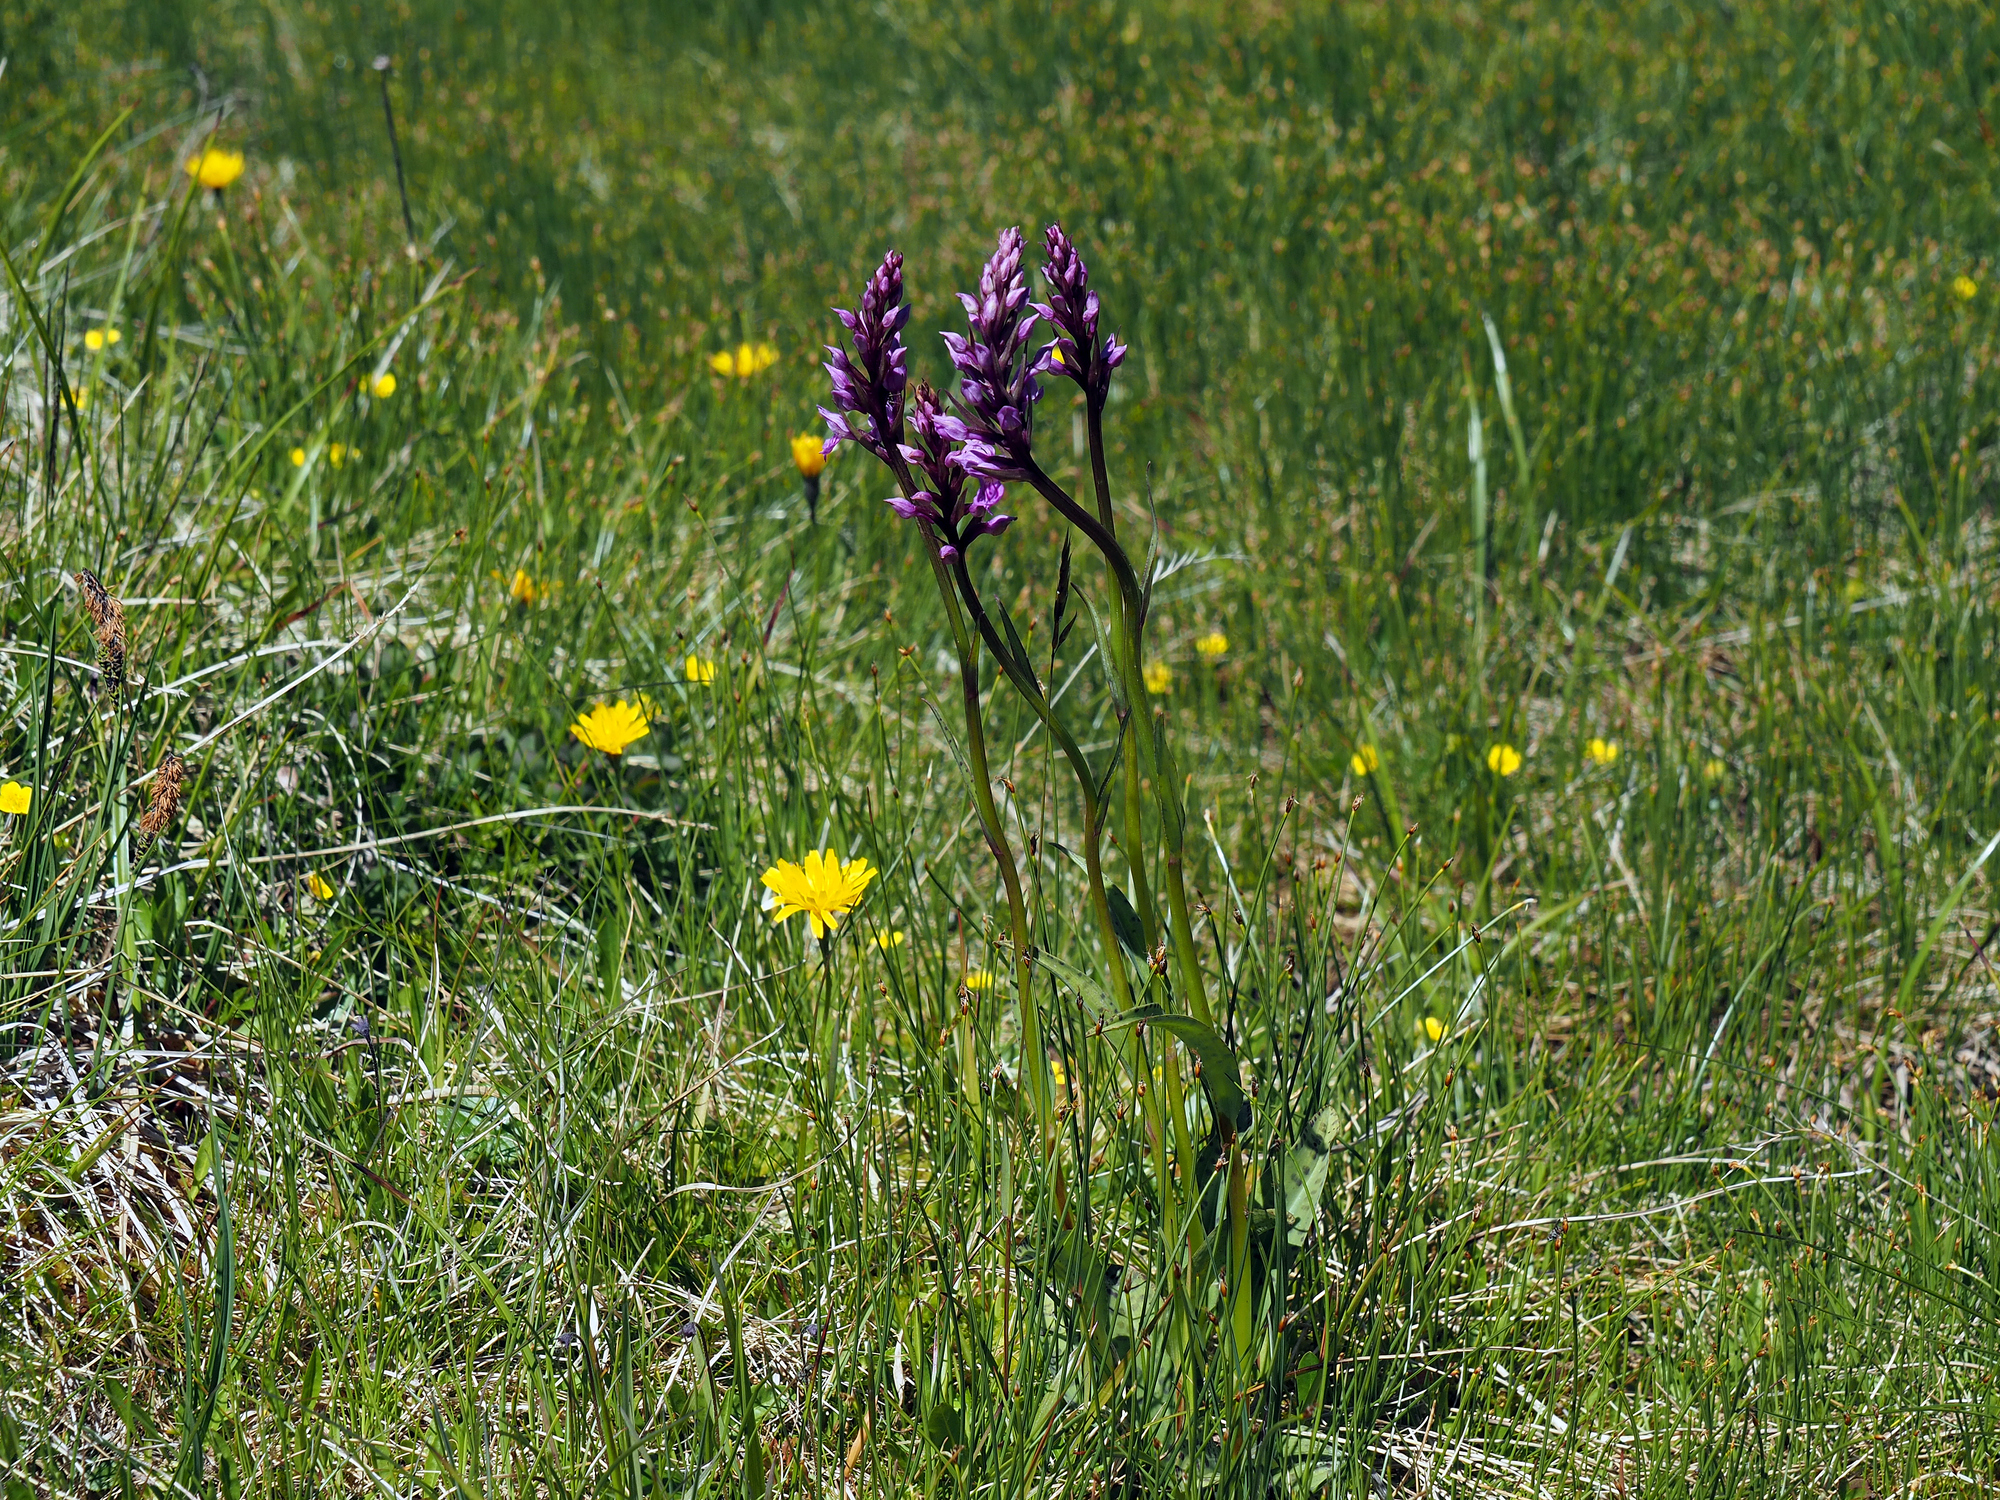 A purple orchid in a grassy field.